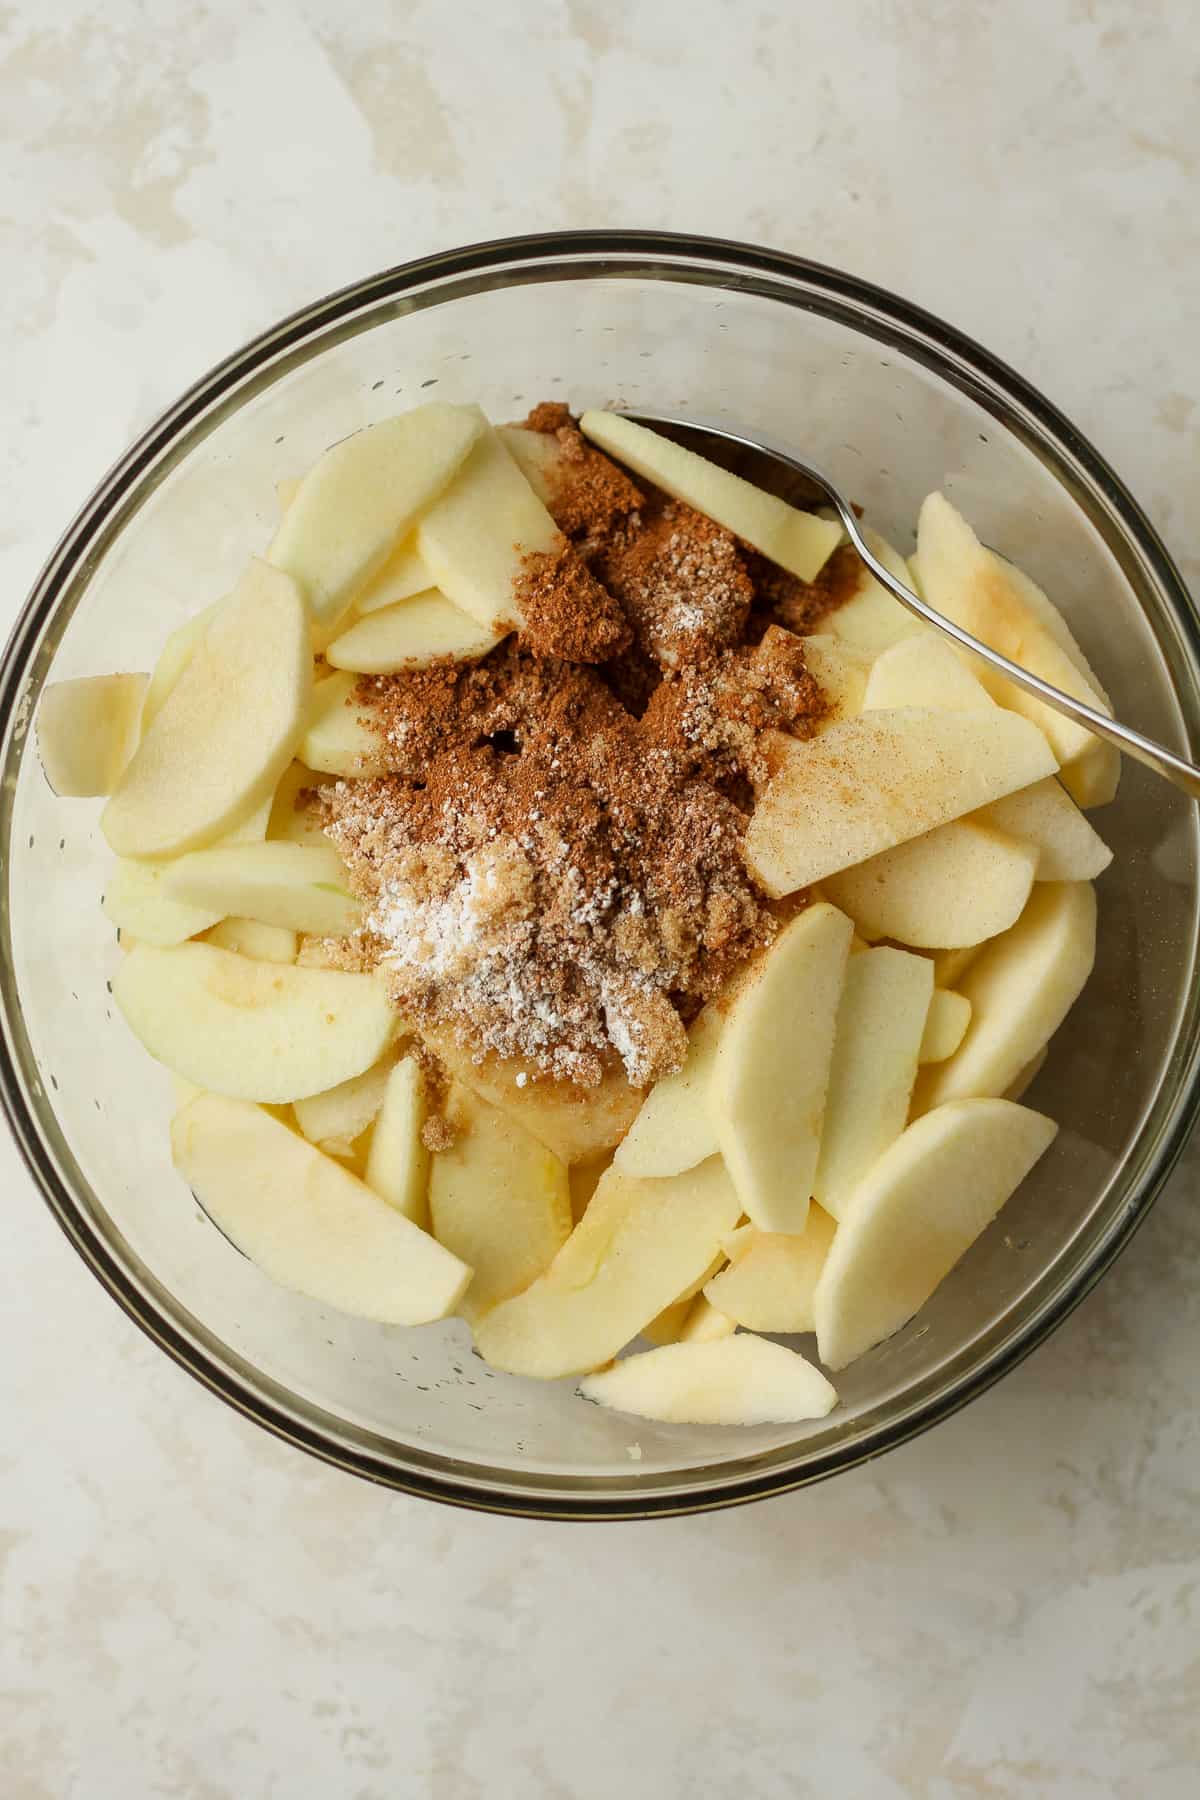 A bowl of the peeled and sliced apples with the cinnamon sugar mixture.